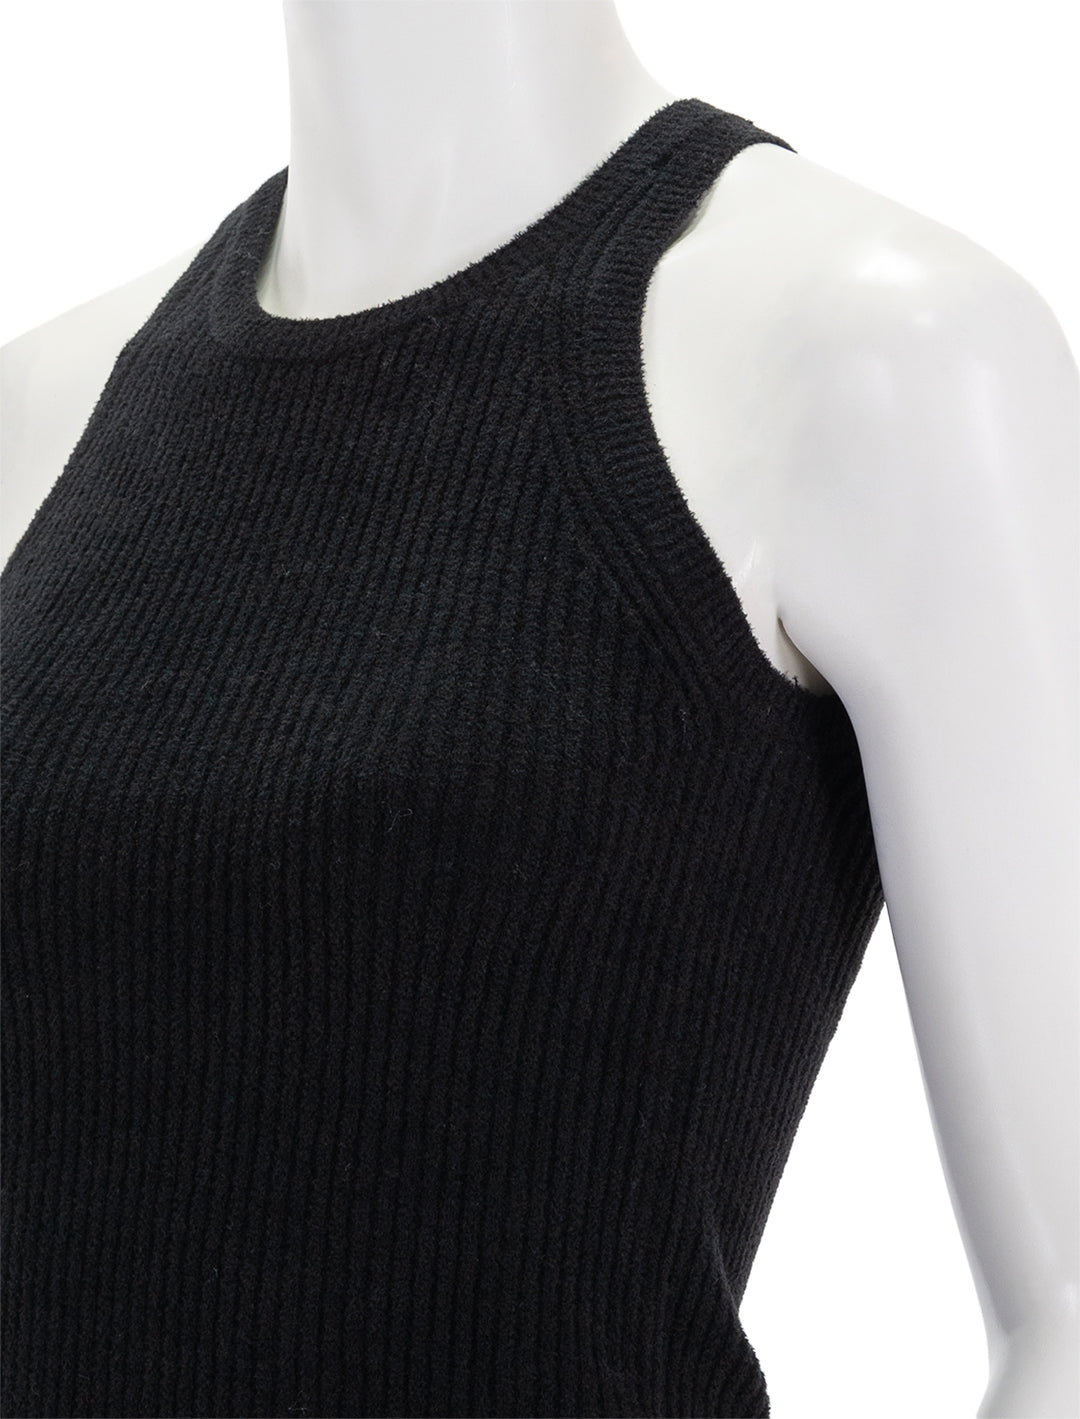 Close-up view of Sundays NYC's lille tank in black.